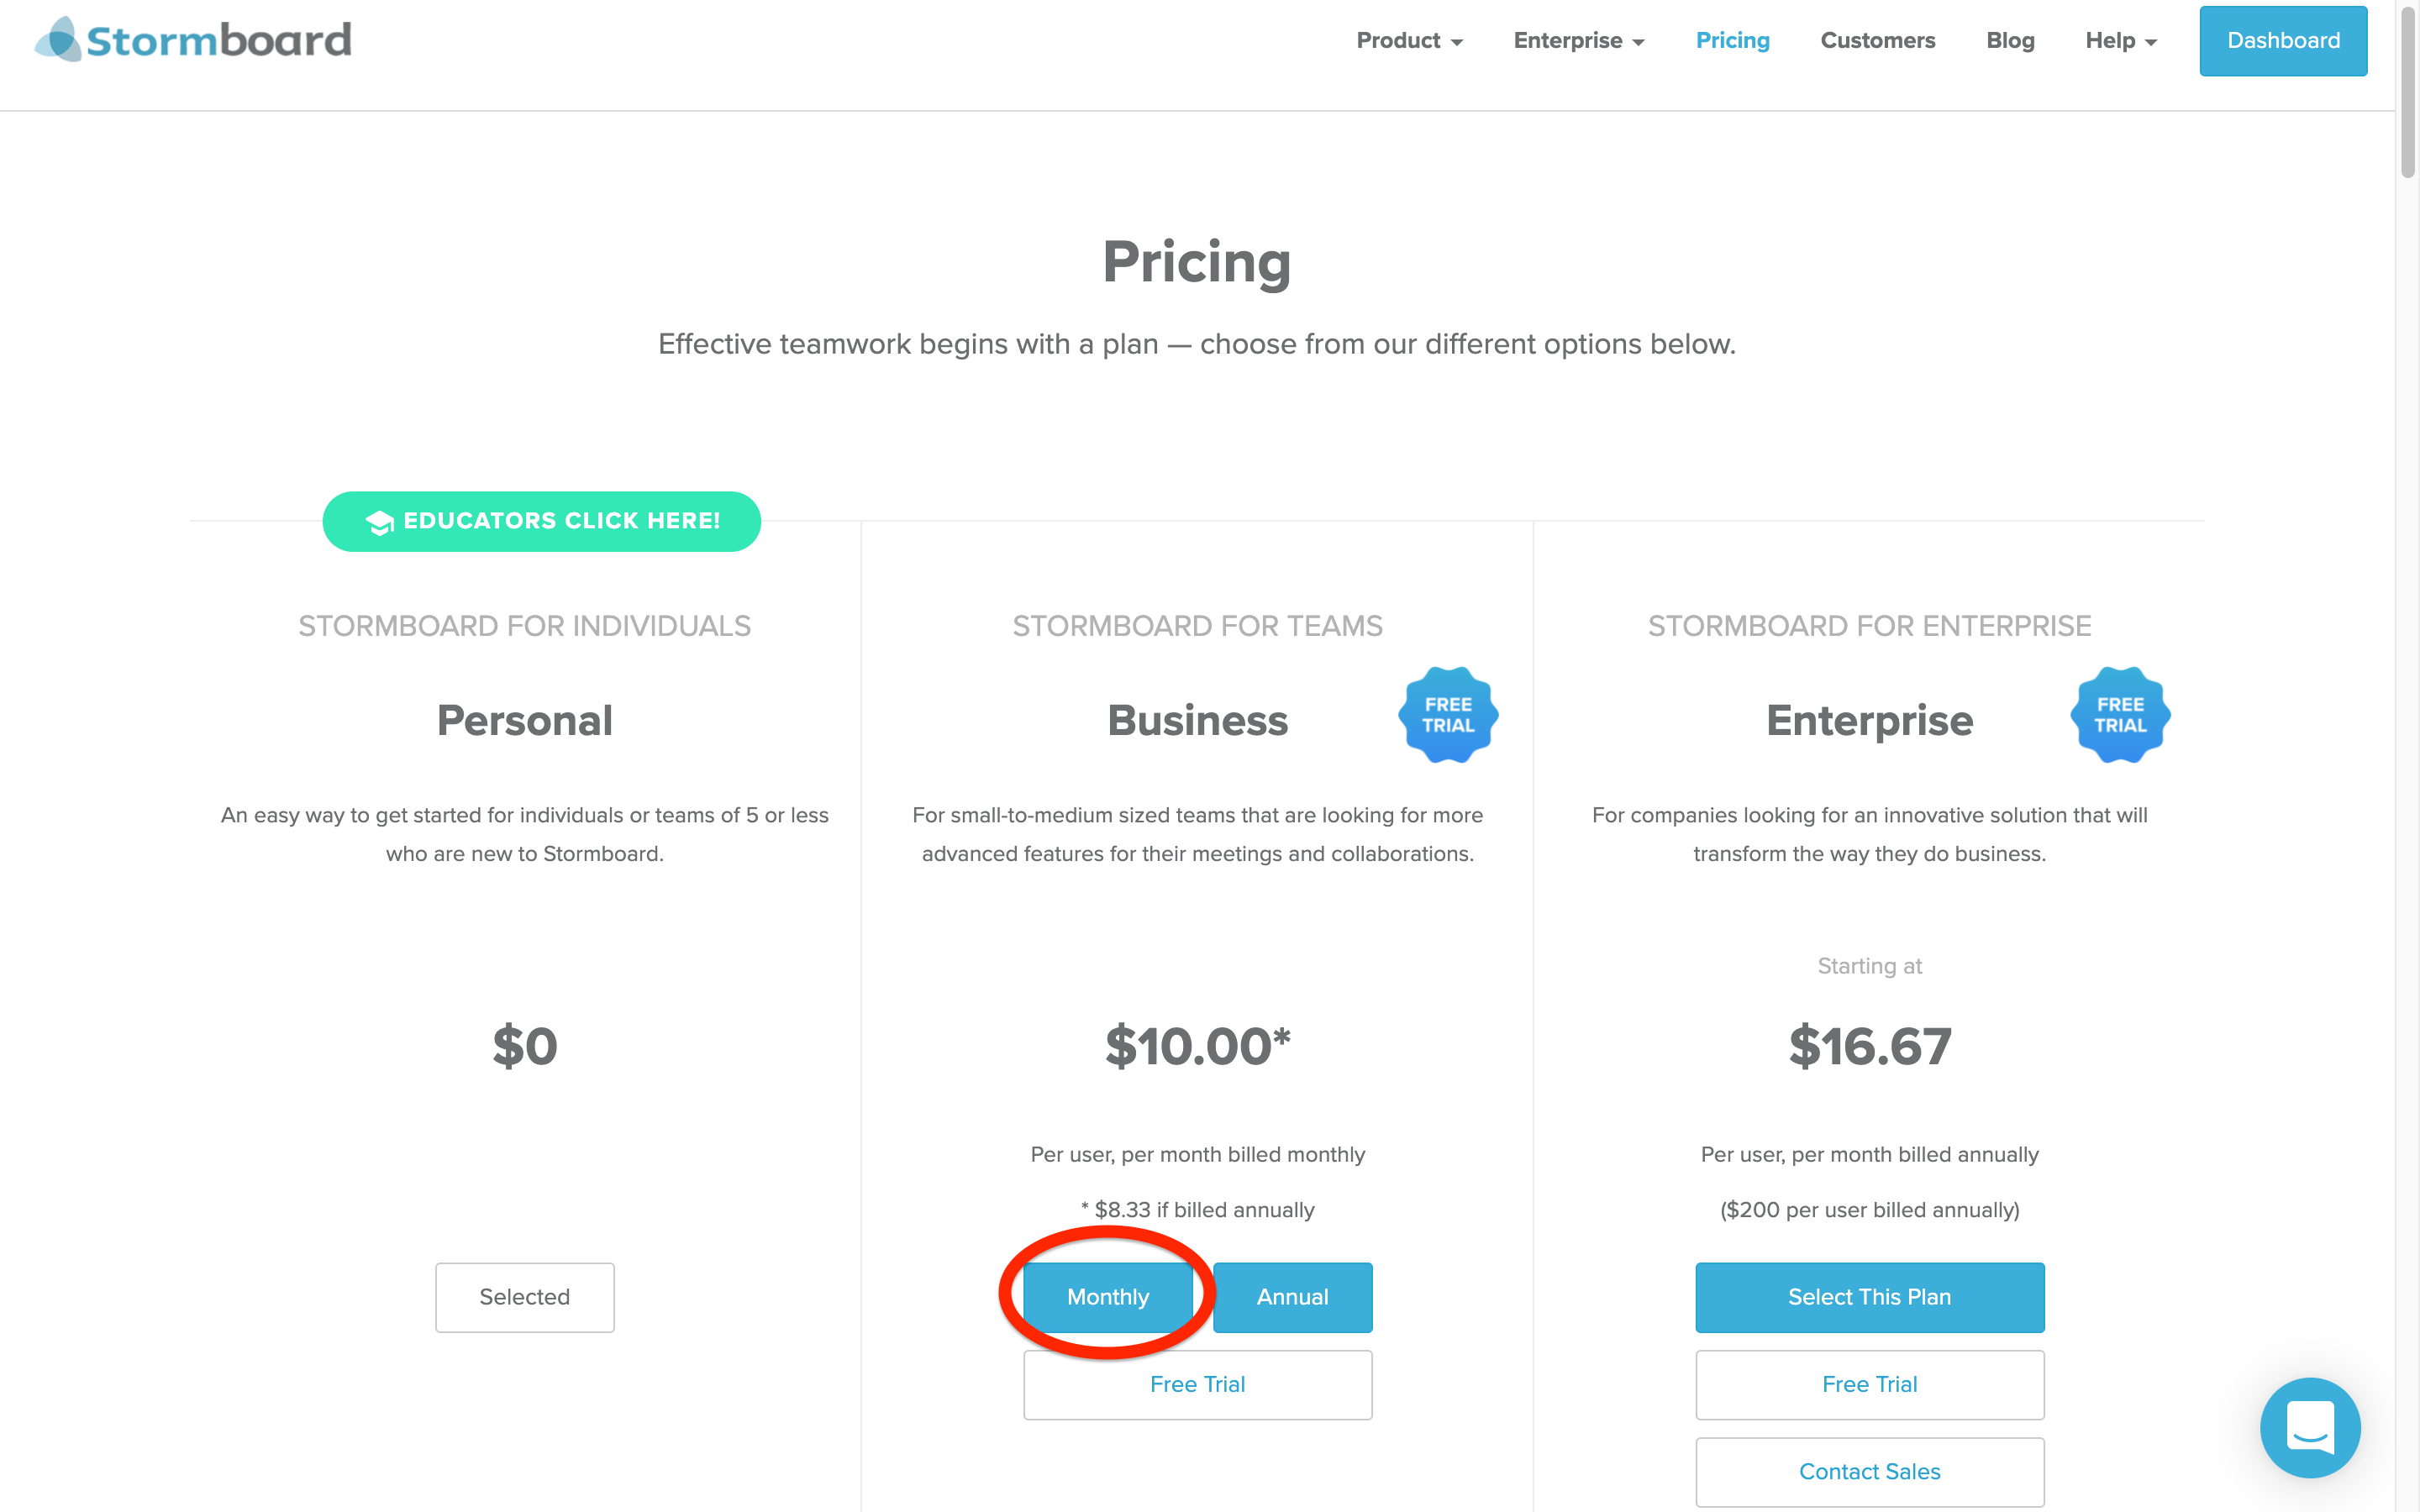 Highlighting Stormboard's Business Monthly plan on the pricing page